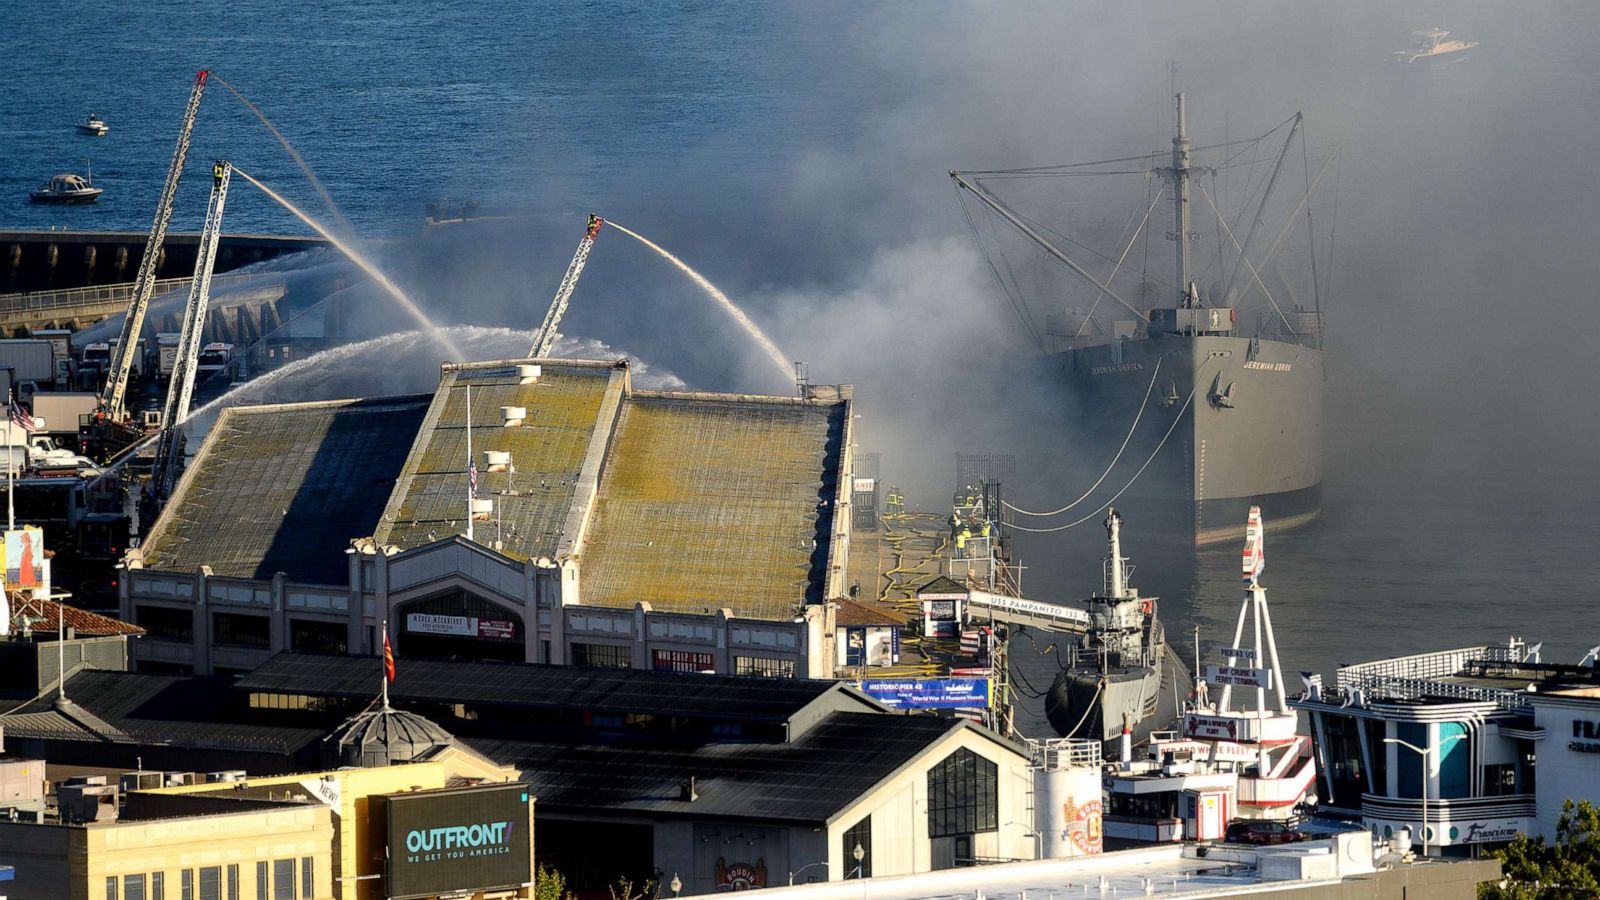 Historic WWII ship saved from San Francisco warehouse fire - ABC News